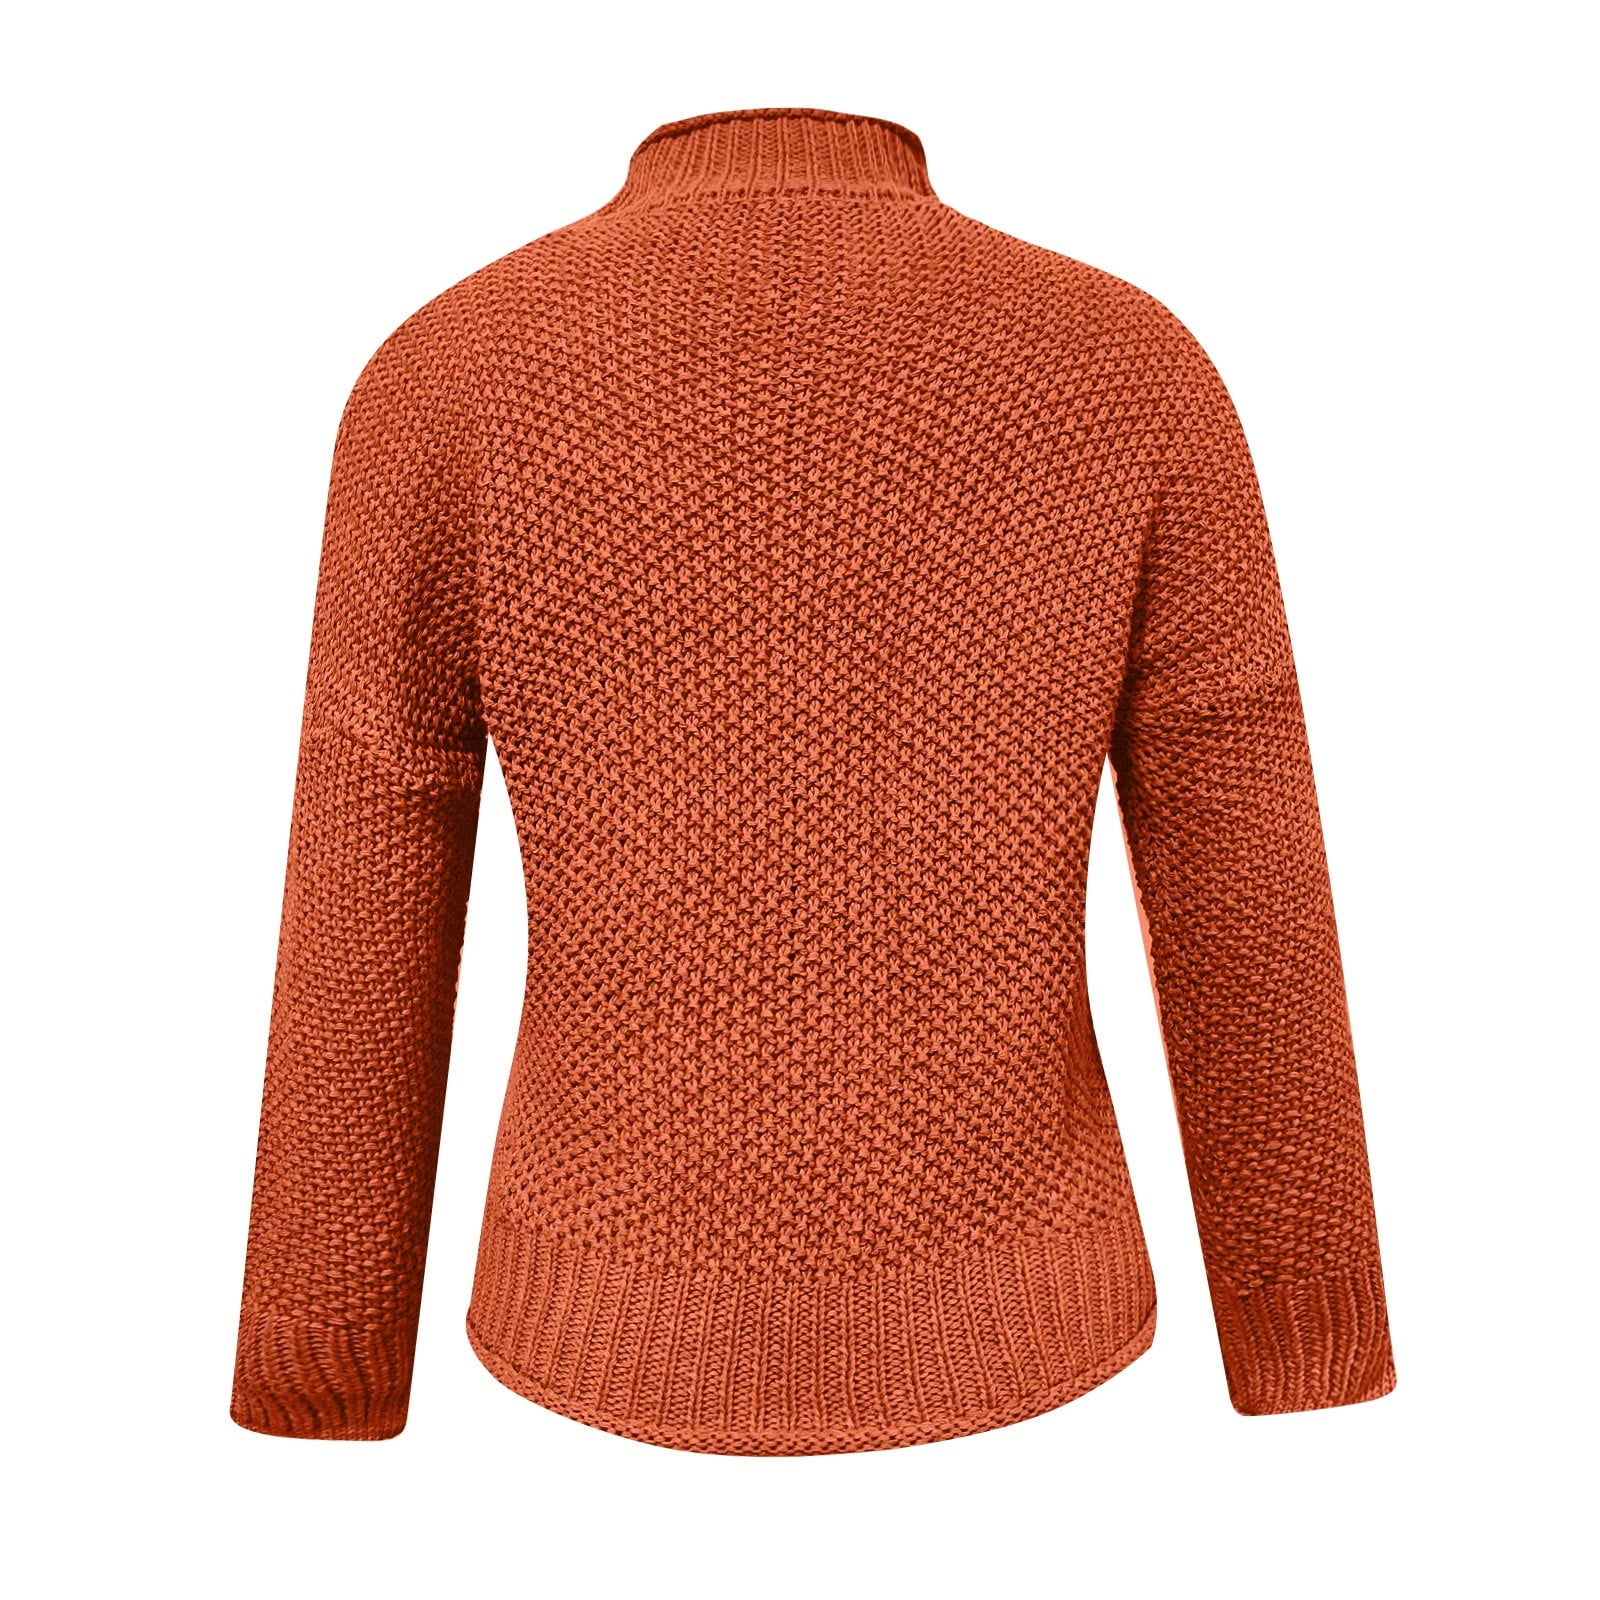 JGGSPWM Solid Waffle Knit Sweaters for Womens Fall Winter Tops Soft Comfy  Jumper Crewneck POM Lantern Long Sleeve Pullover Casual Elegant Sweater  Orange S 